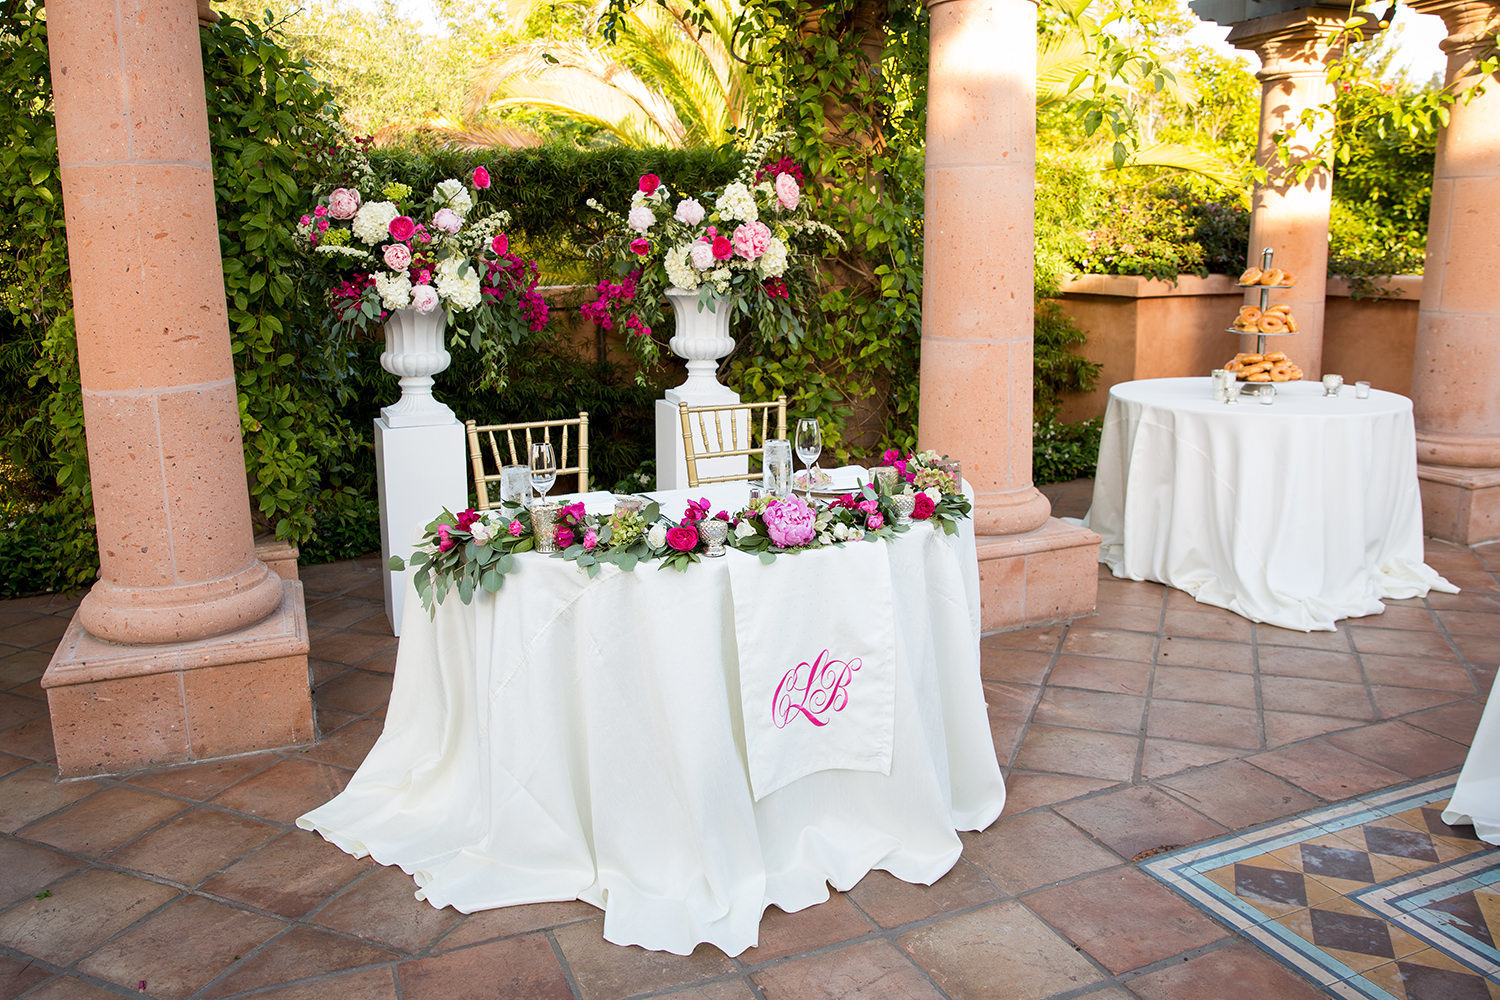 The head table adorned in flowers and a monogram